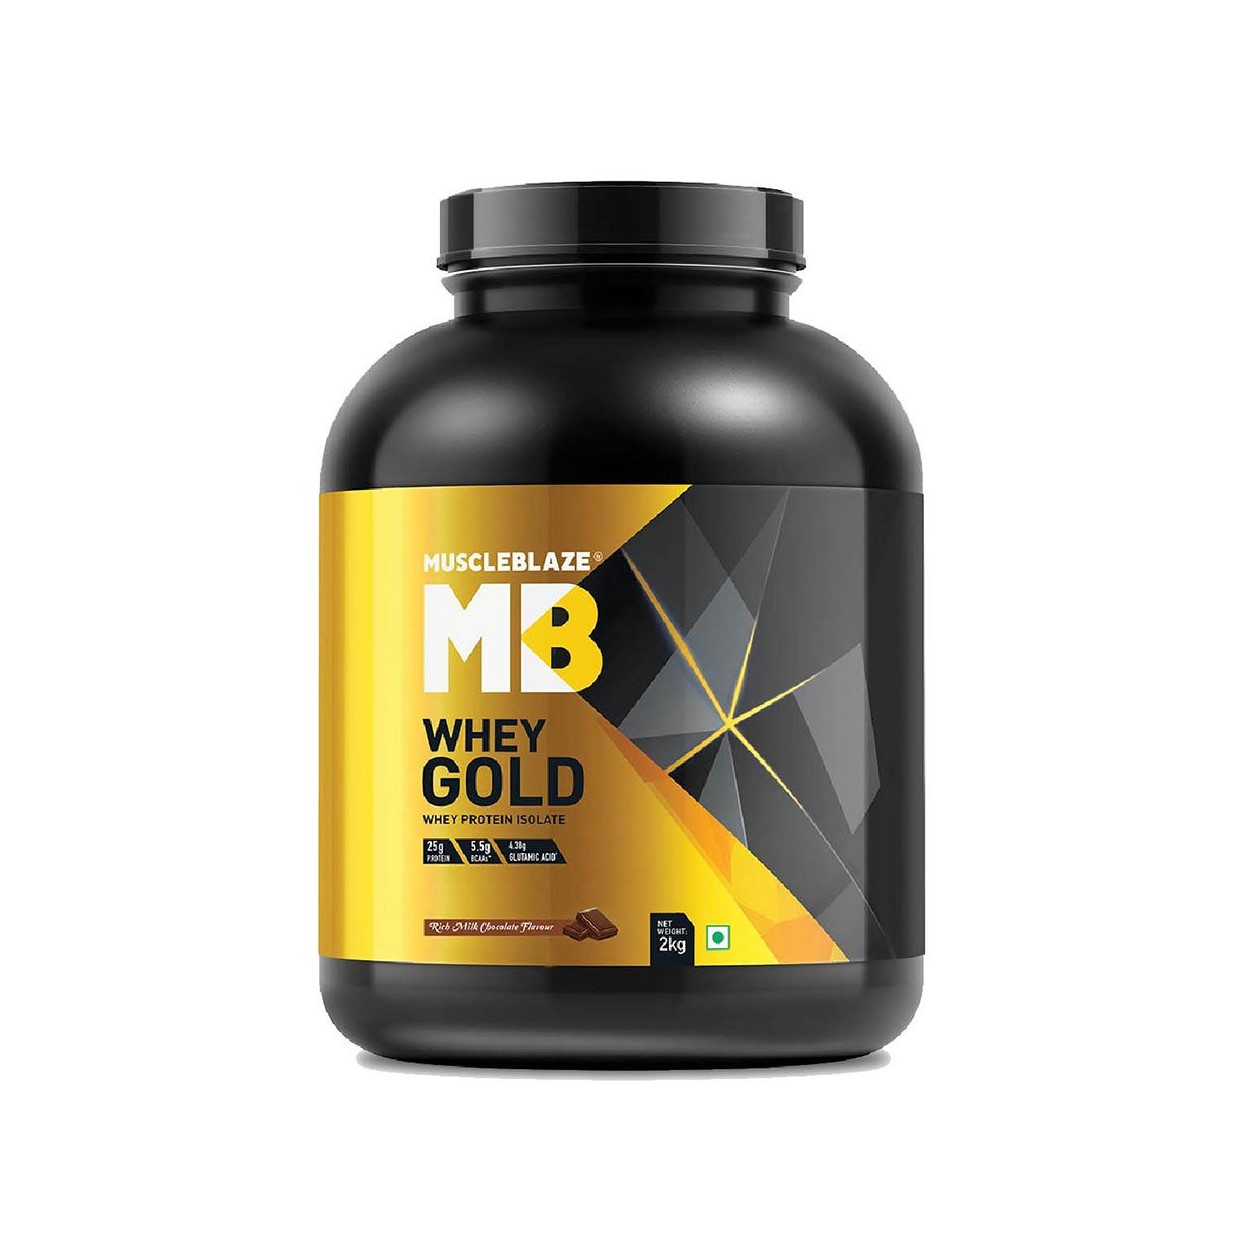 Buy Original MuscleBlaze Whey Gold 100% Whey Protein Isolate online